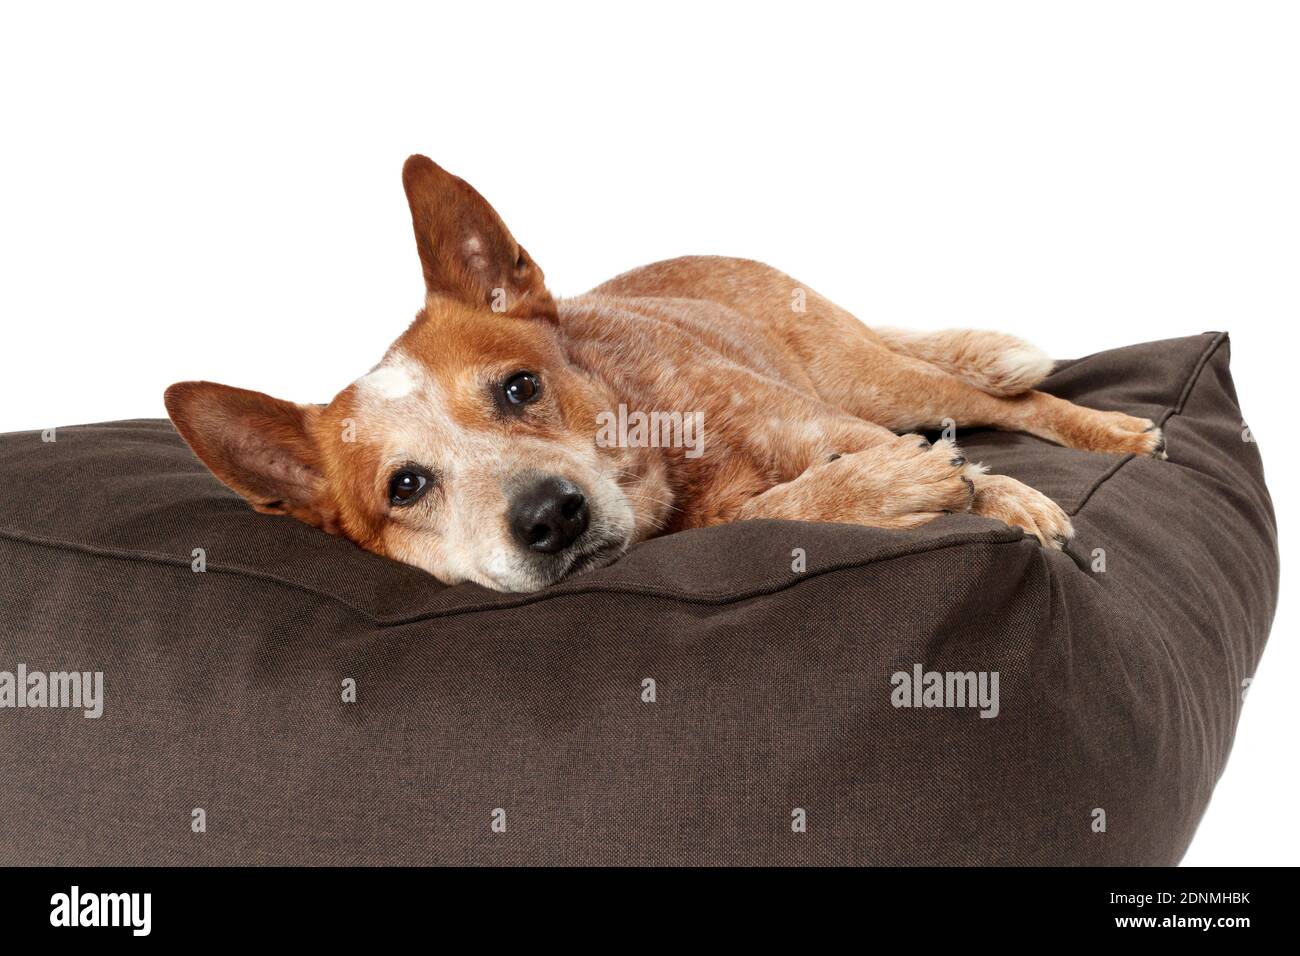 Australian Cattle Dog lying on a pet bed. Germany.. Stock Photo